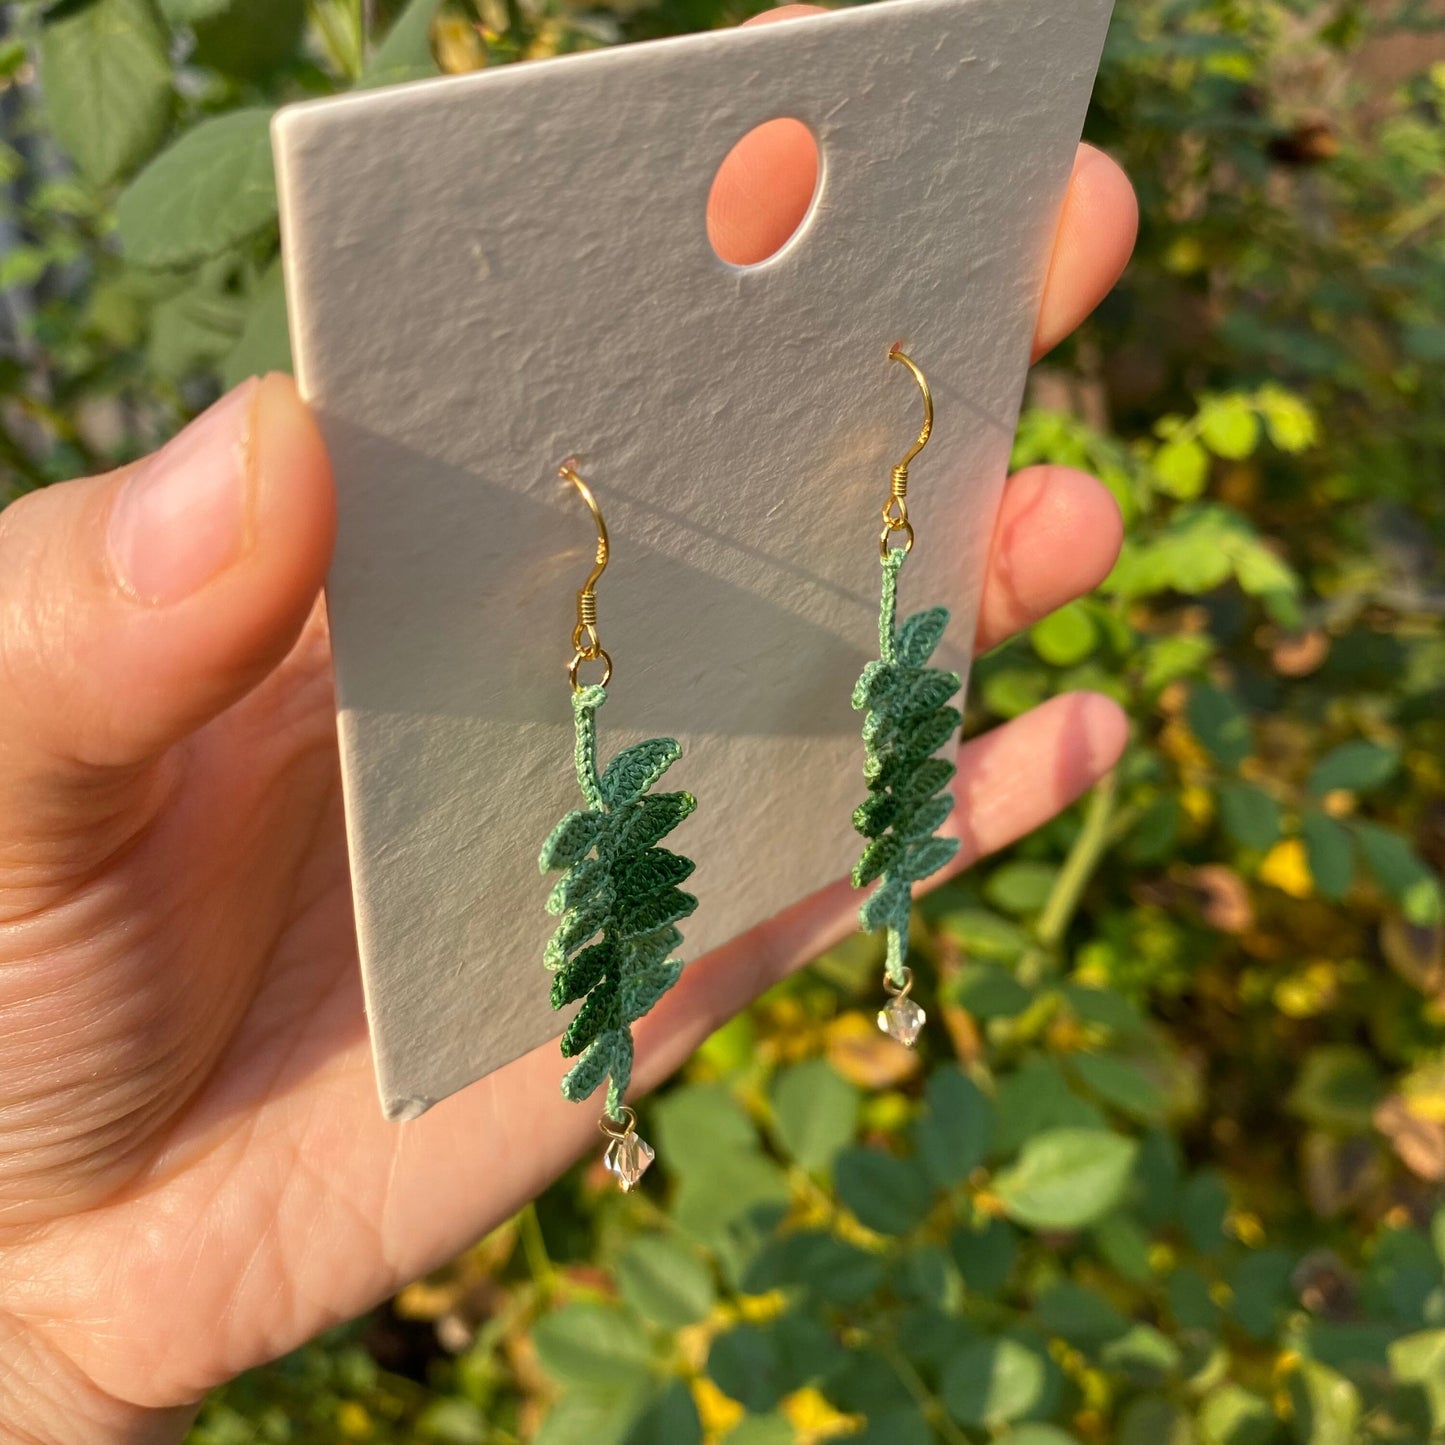 Load image into Gallery viewer, Green ombre fern leaf crochet handmade dangle earrings/microcrochet/Knitted jewelry/Forest style/Indoor plant/Polypodiophyta/Instagram
